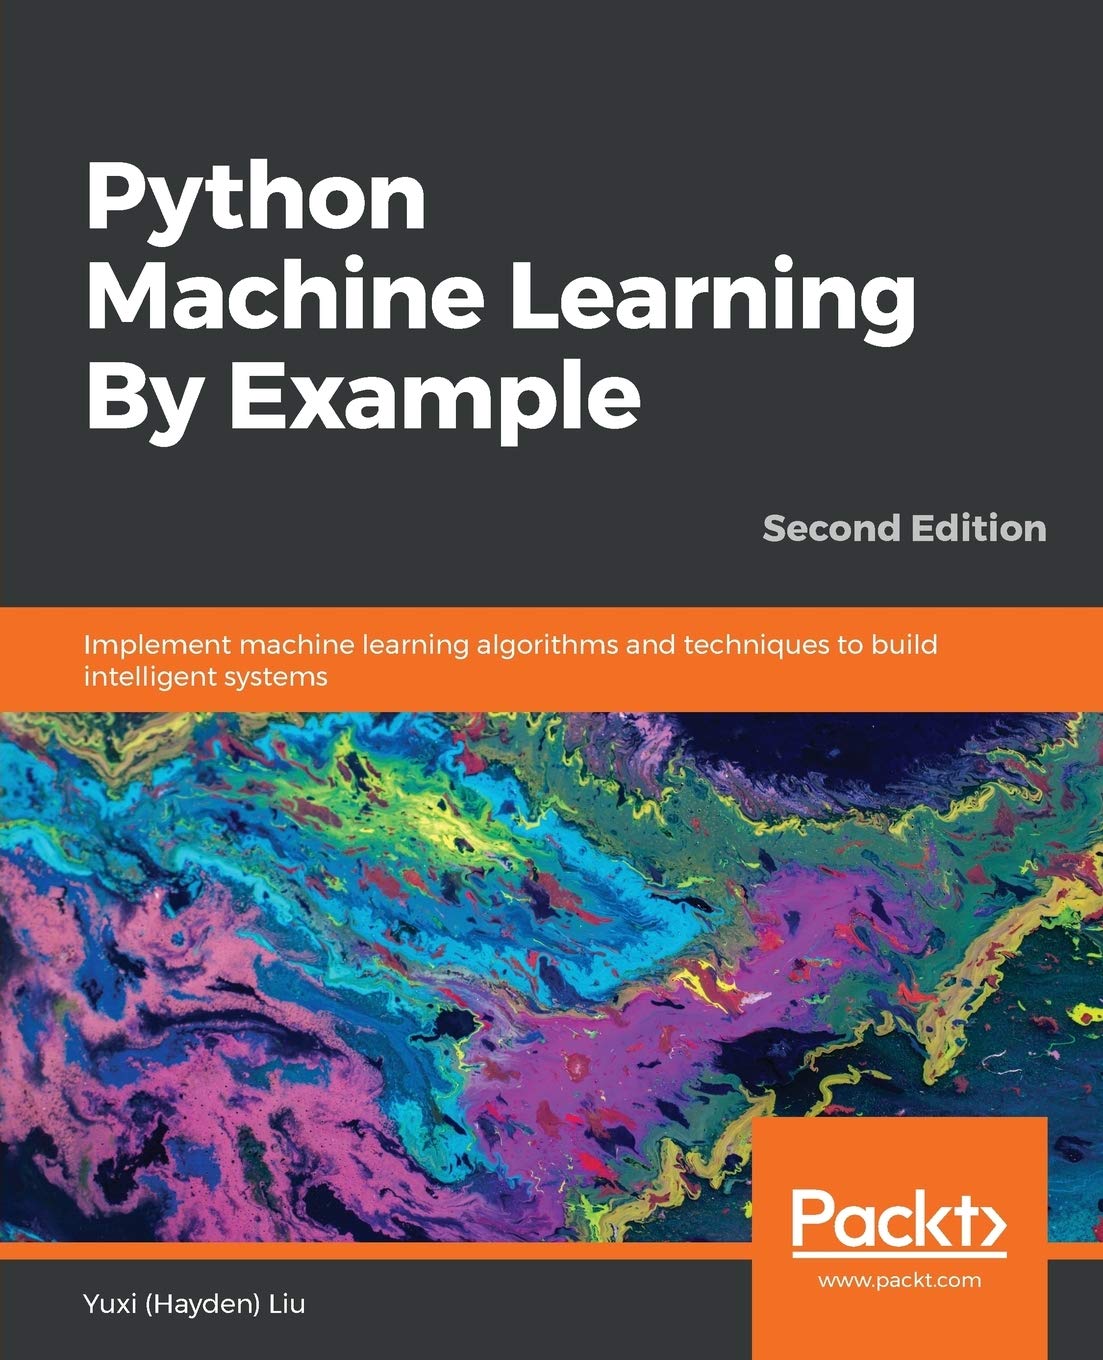 Python Machine Learning By Example: Implement machine learning algorithms and techniques to build intelligent systems, 2nd Edition by Yuxi (Hayden) Liu 